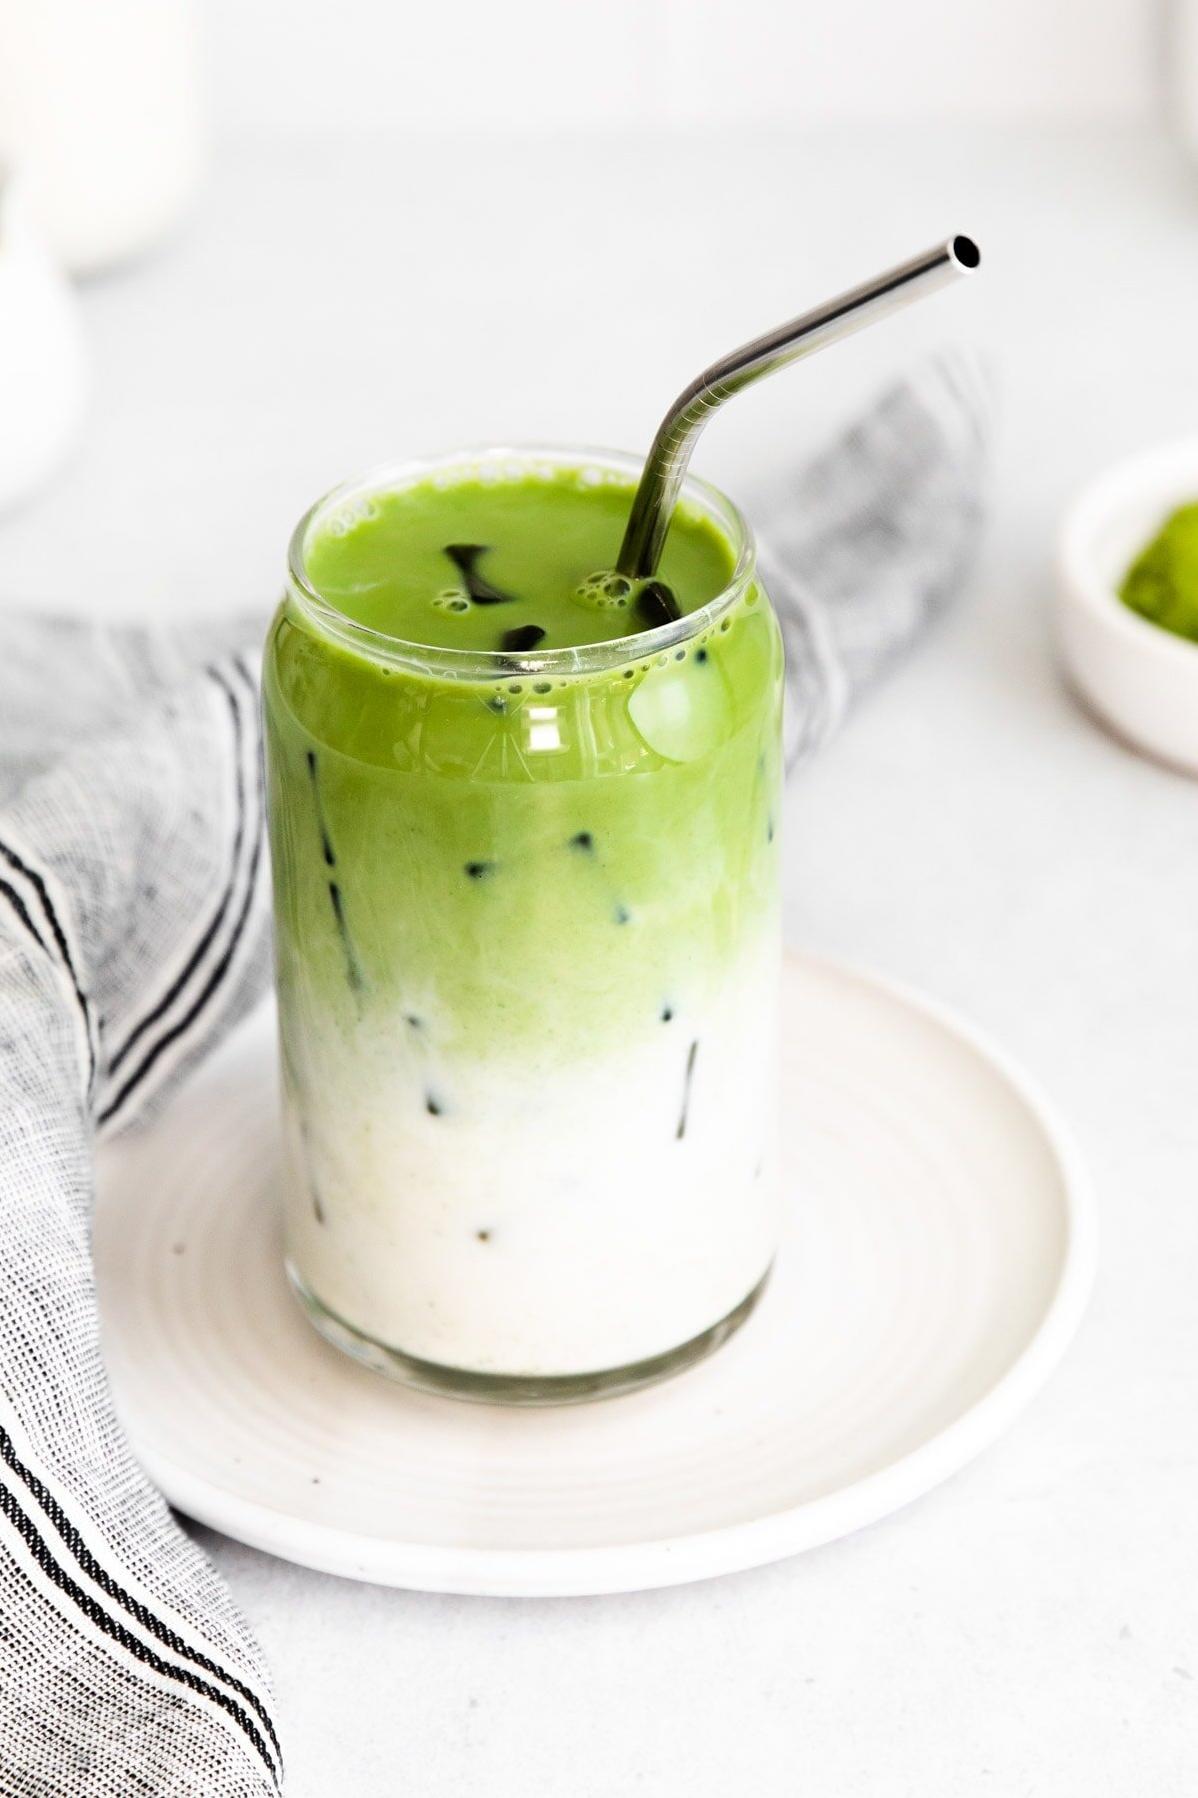  Cooling off in style with this refreshing Iced Matcha Latte